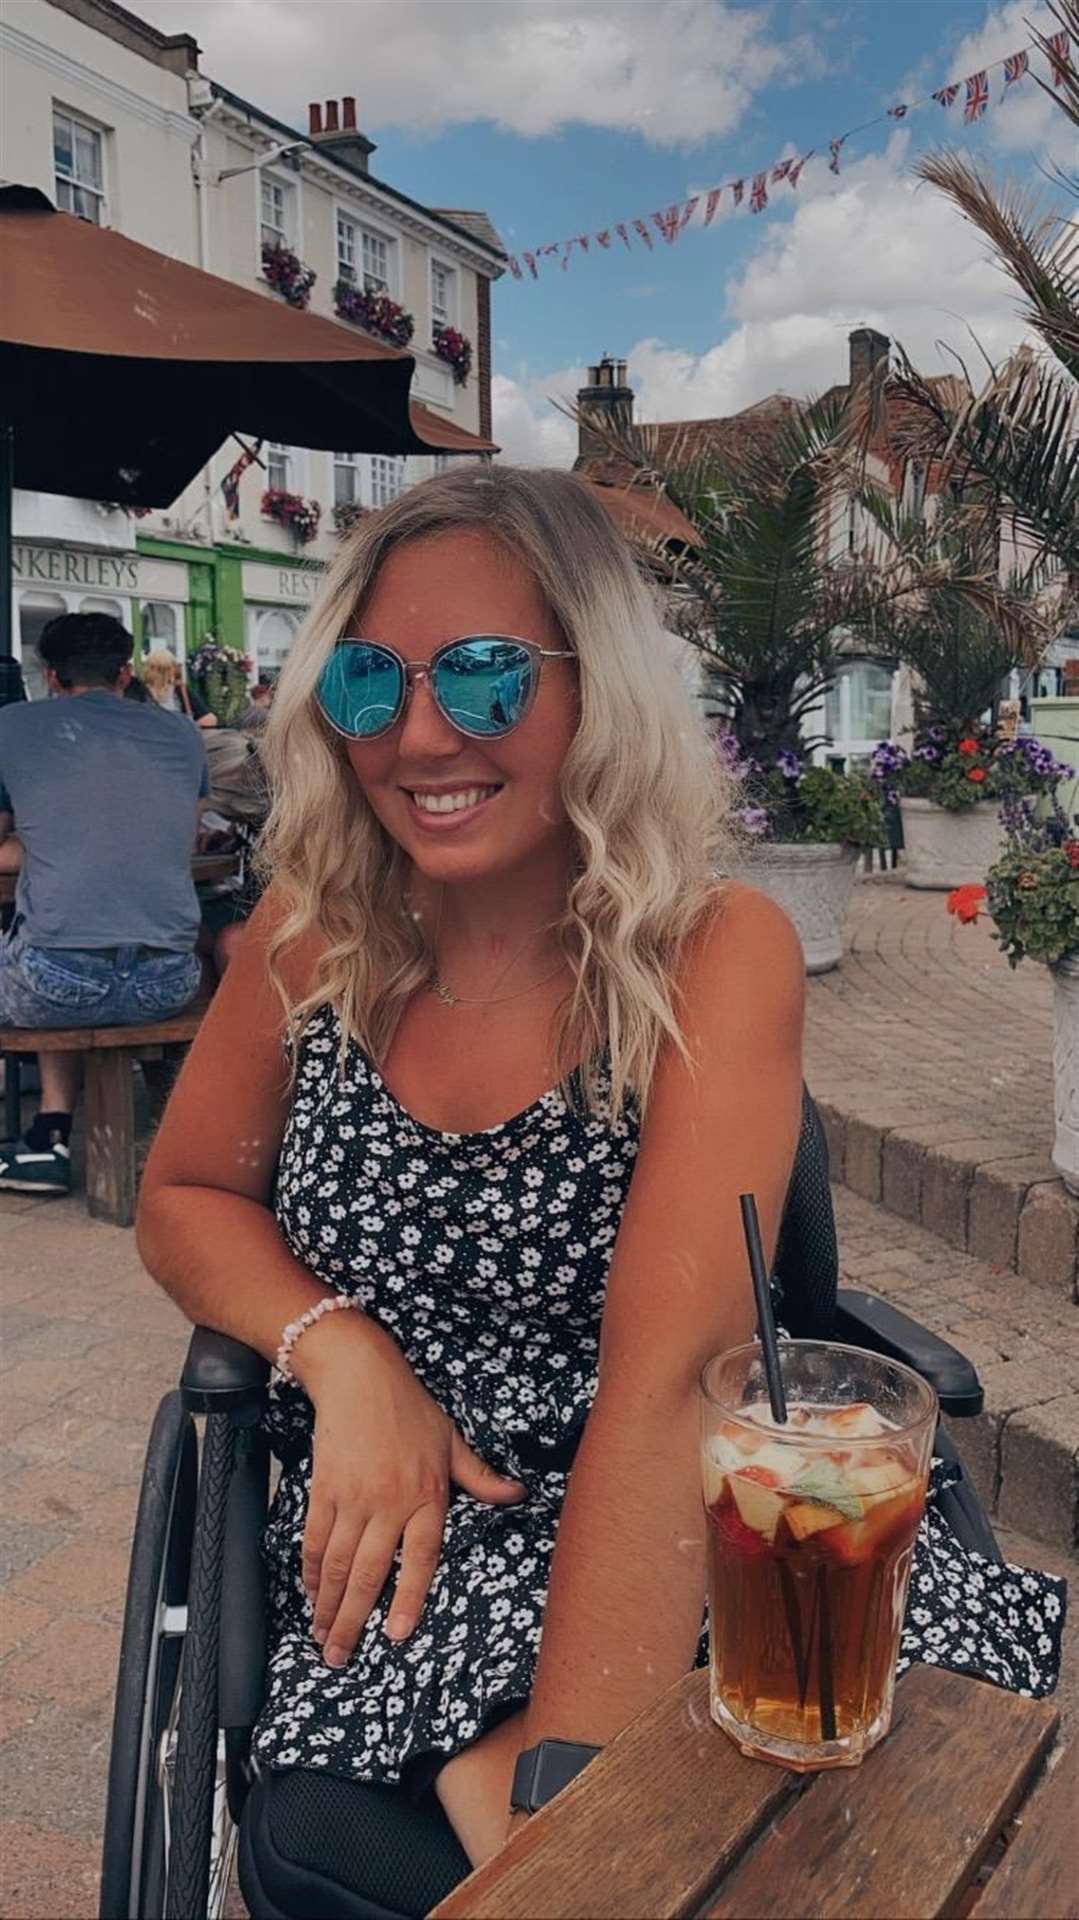 Hayley Bray enjoys dining out but finds many establishments can't accommodate her wheelchair